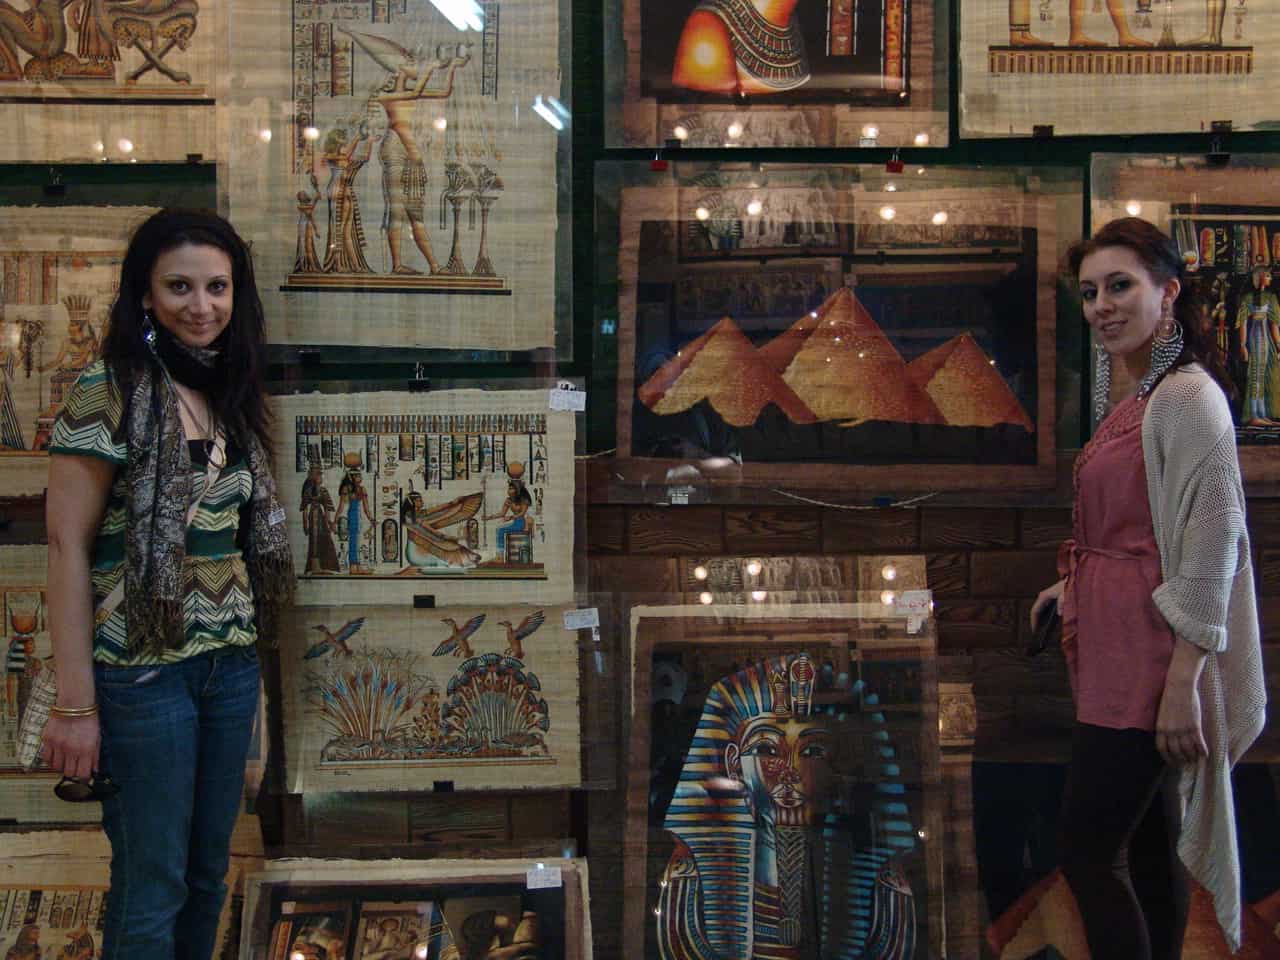 Papyrus shop in Giza, Egypt